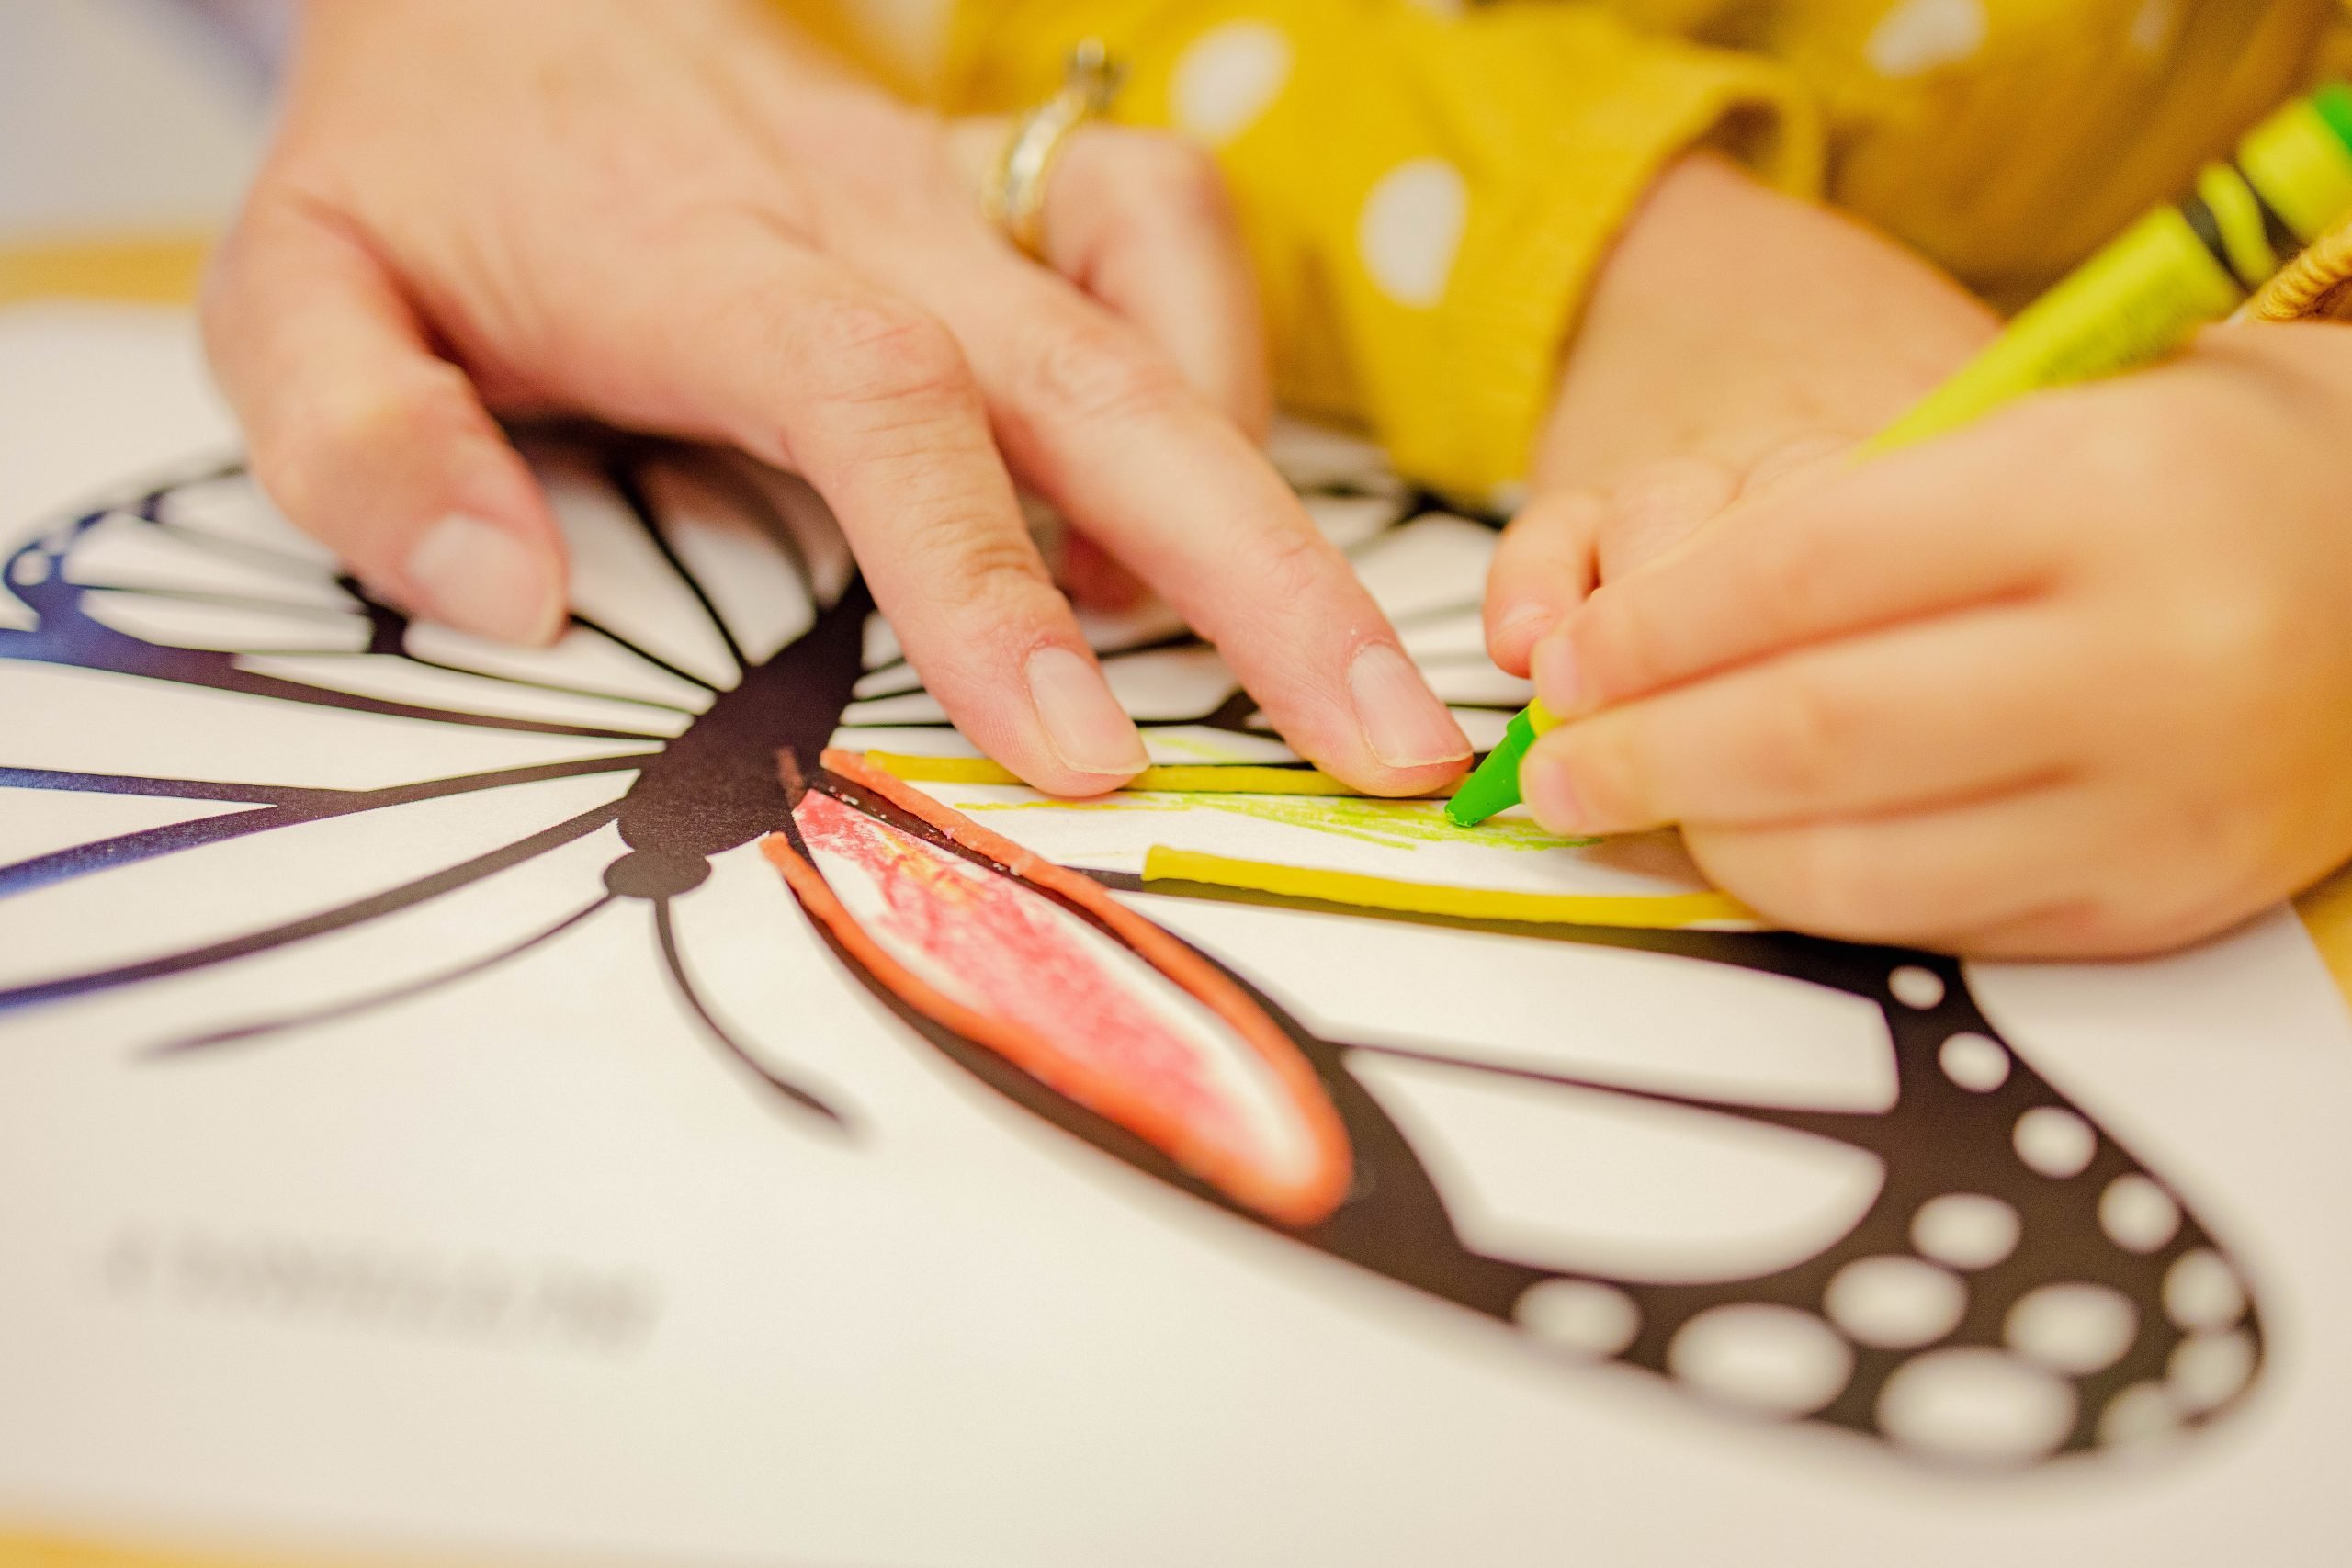 child and parent coloring, ways parents and children can connect and bond